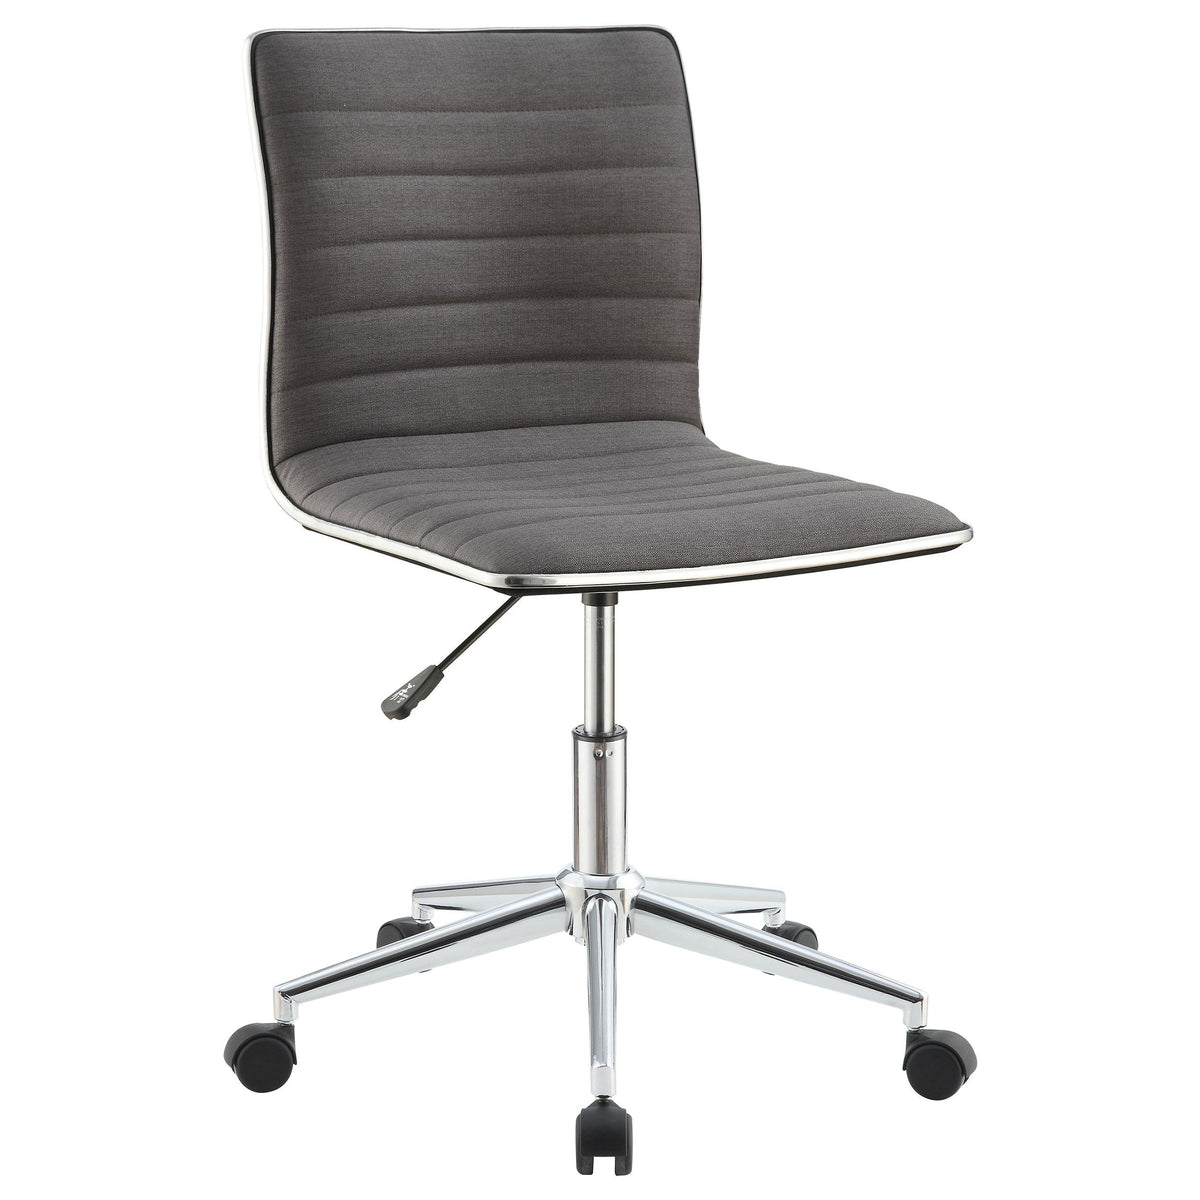 Chryses Adjustable Height Office Chair Grey and Chrome  Las Vegas Furniture Stores